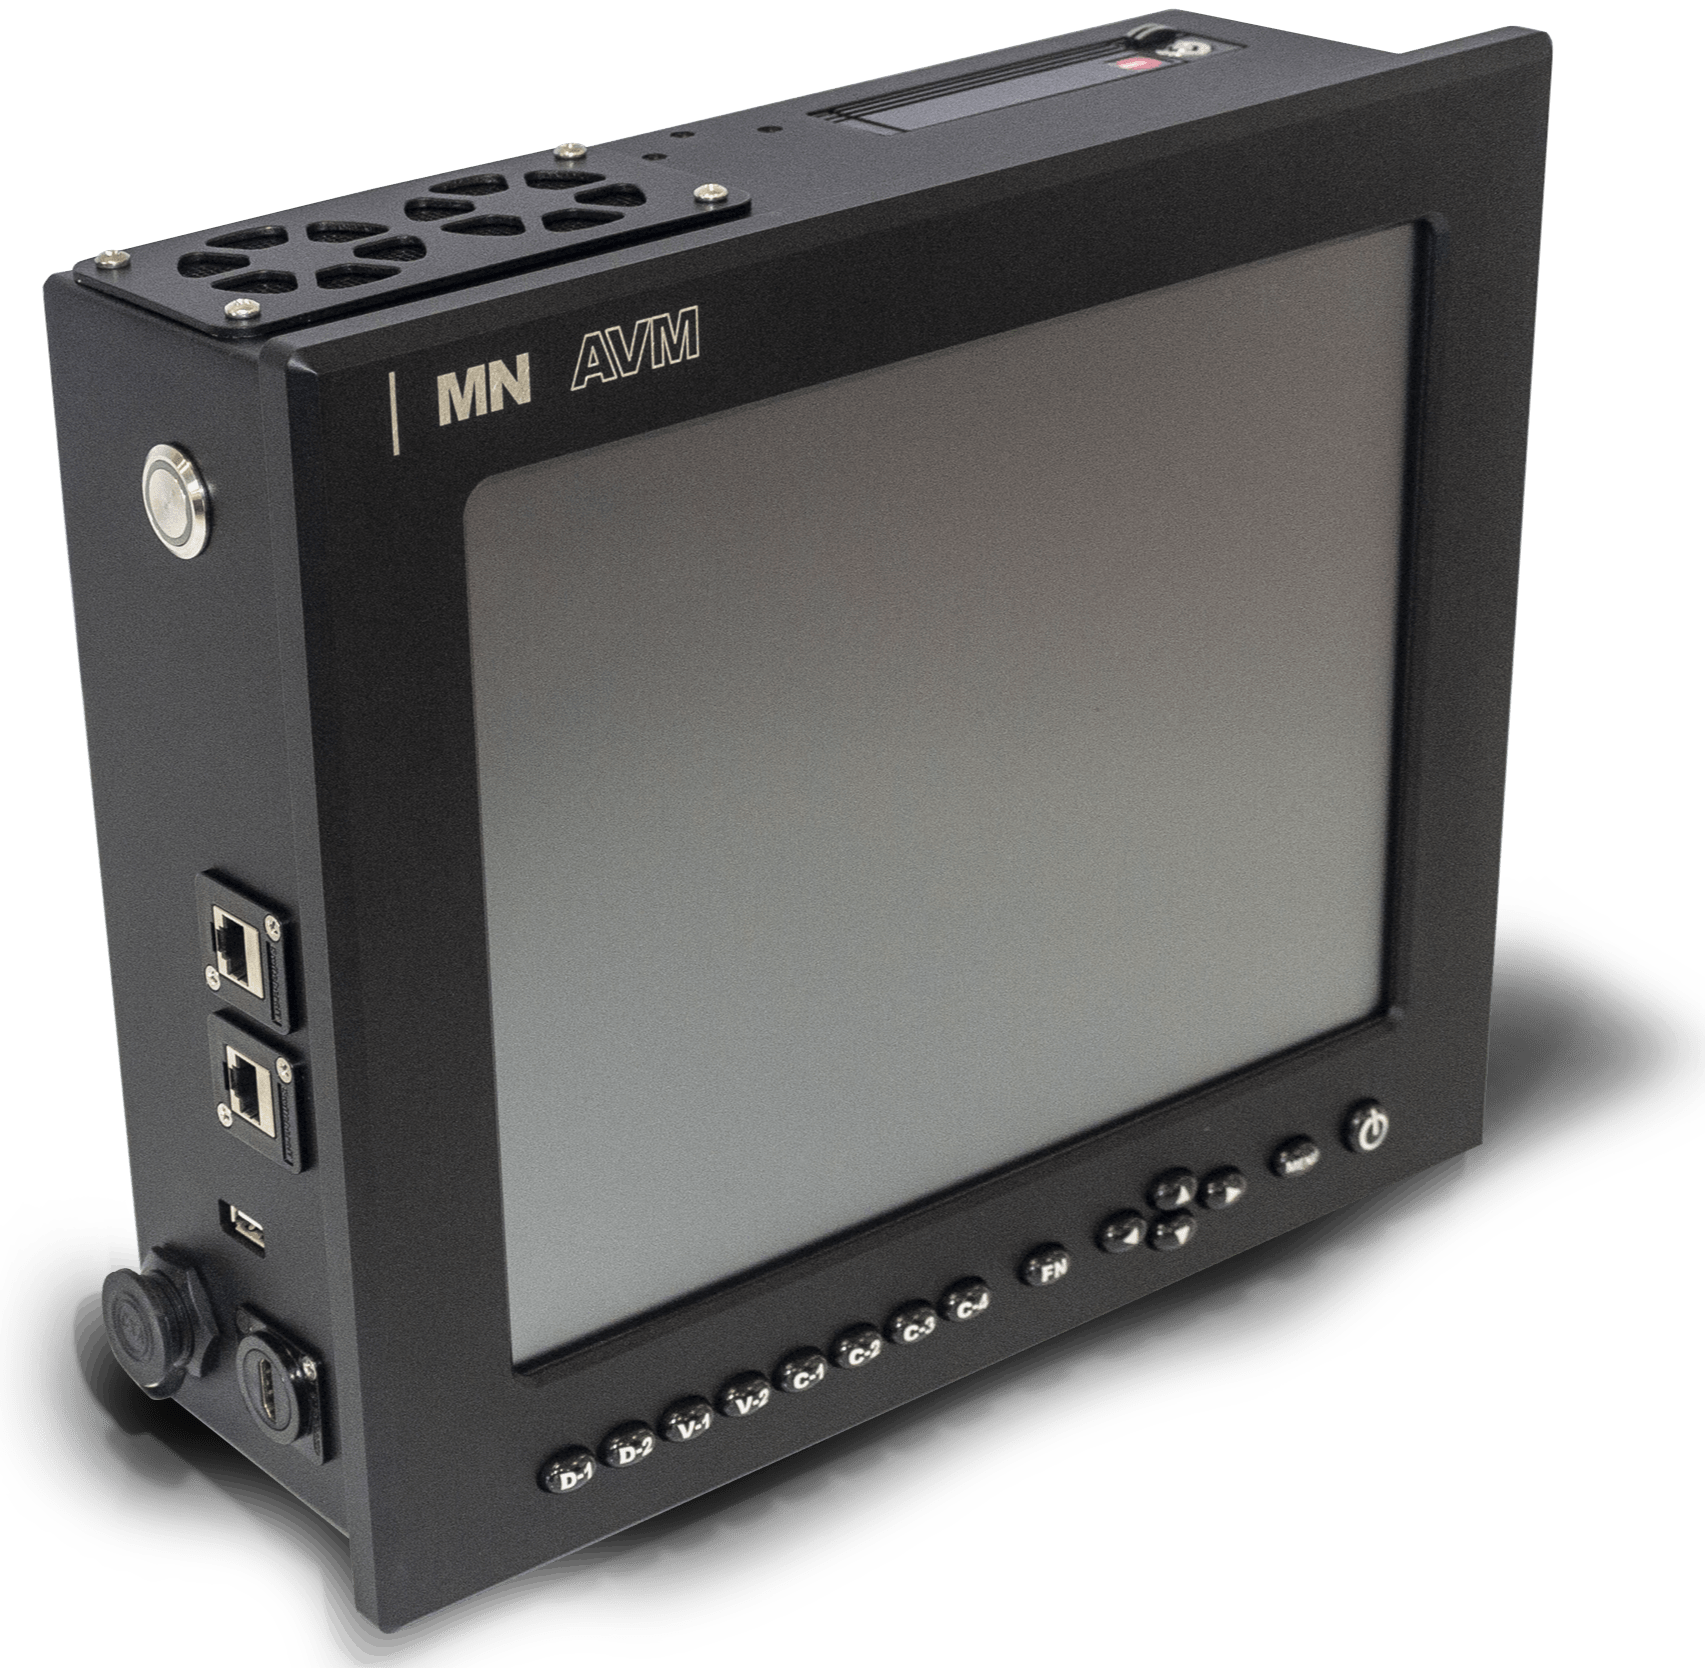 MarineNav's Leviathan AVM monitor with embedded computer